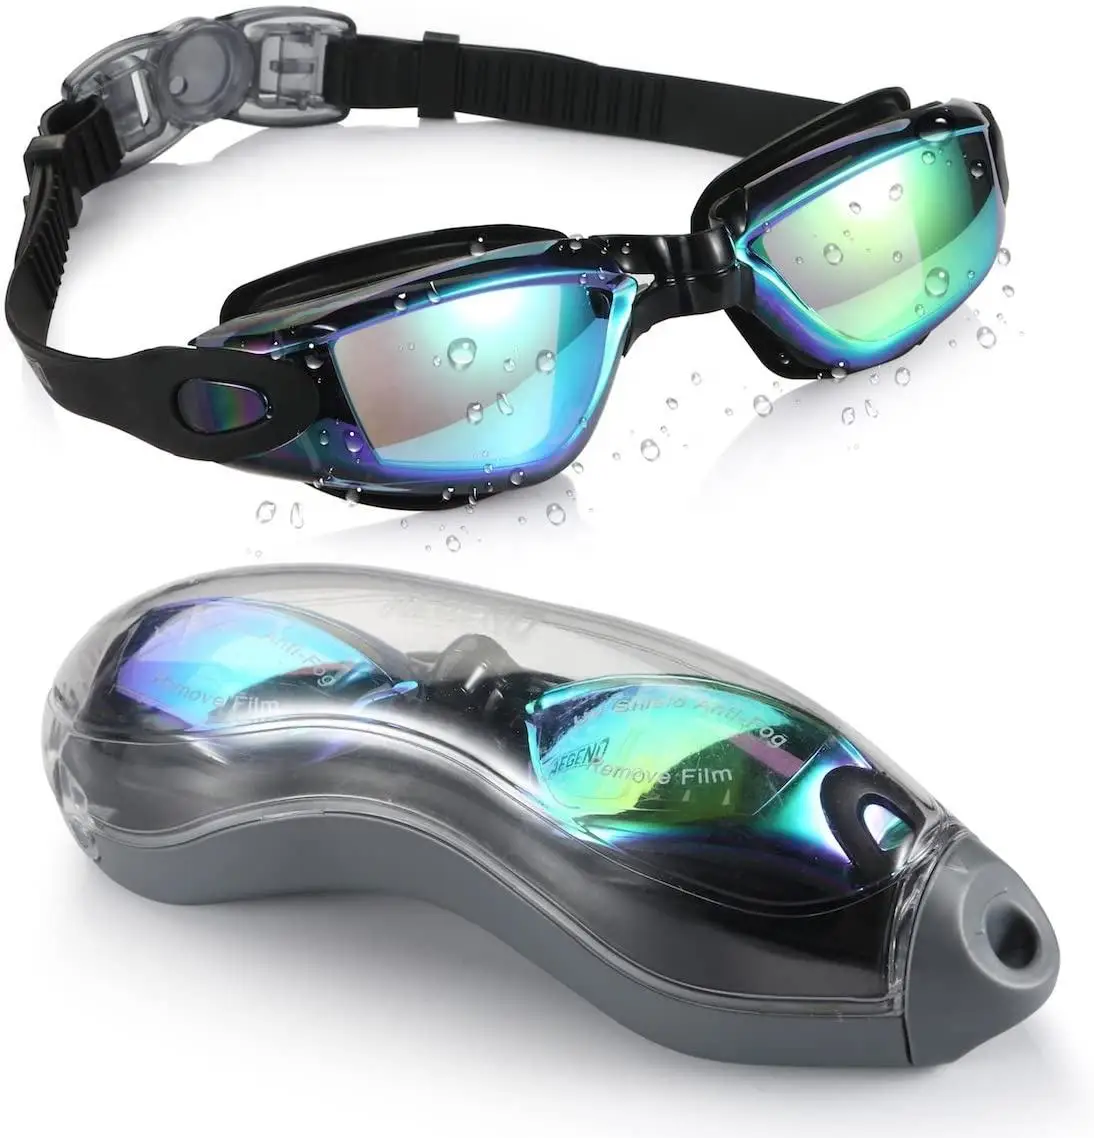 Hot Sale Swim Goggles, Swimming Goggles No Leaking Anti Fog UV Protection Triathlon Swim Glasses with Protection Case adluts silicone swimming goggles swimming glasses with earplugs and nose clip electroplate gray blue очки для плавания